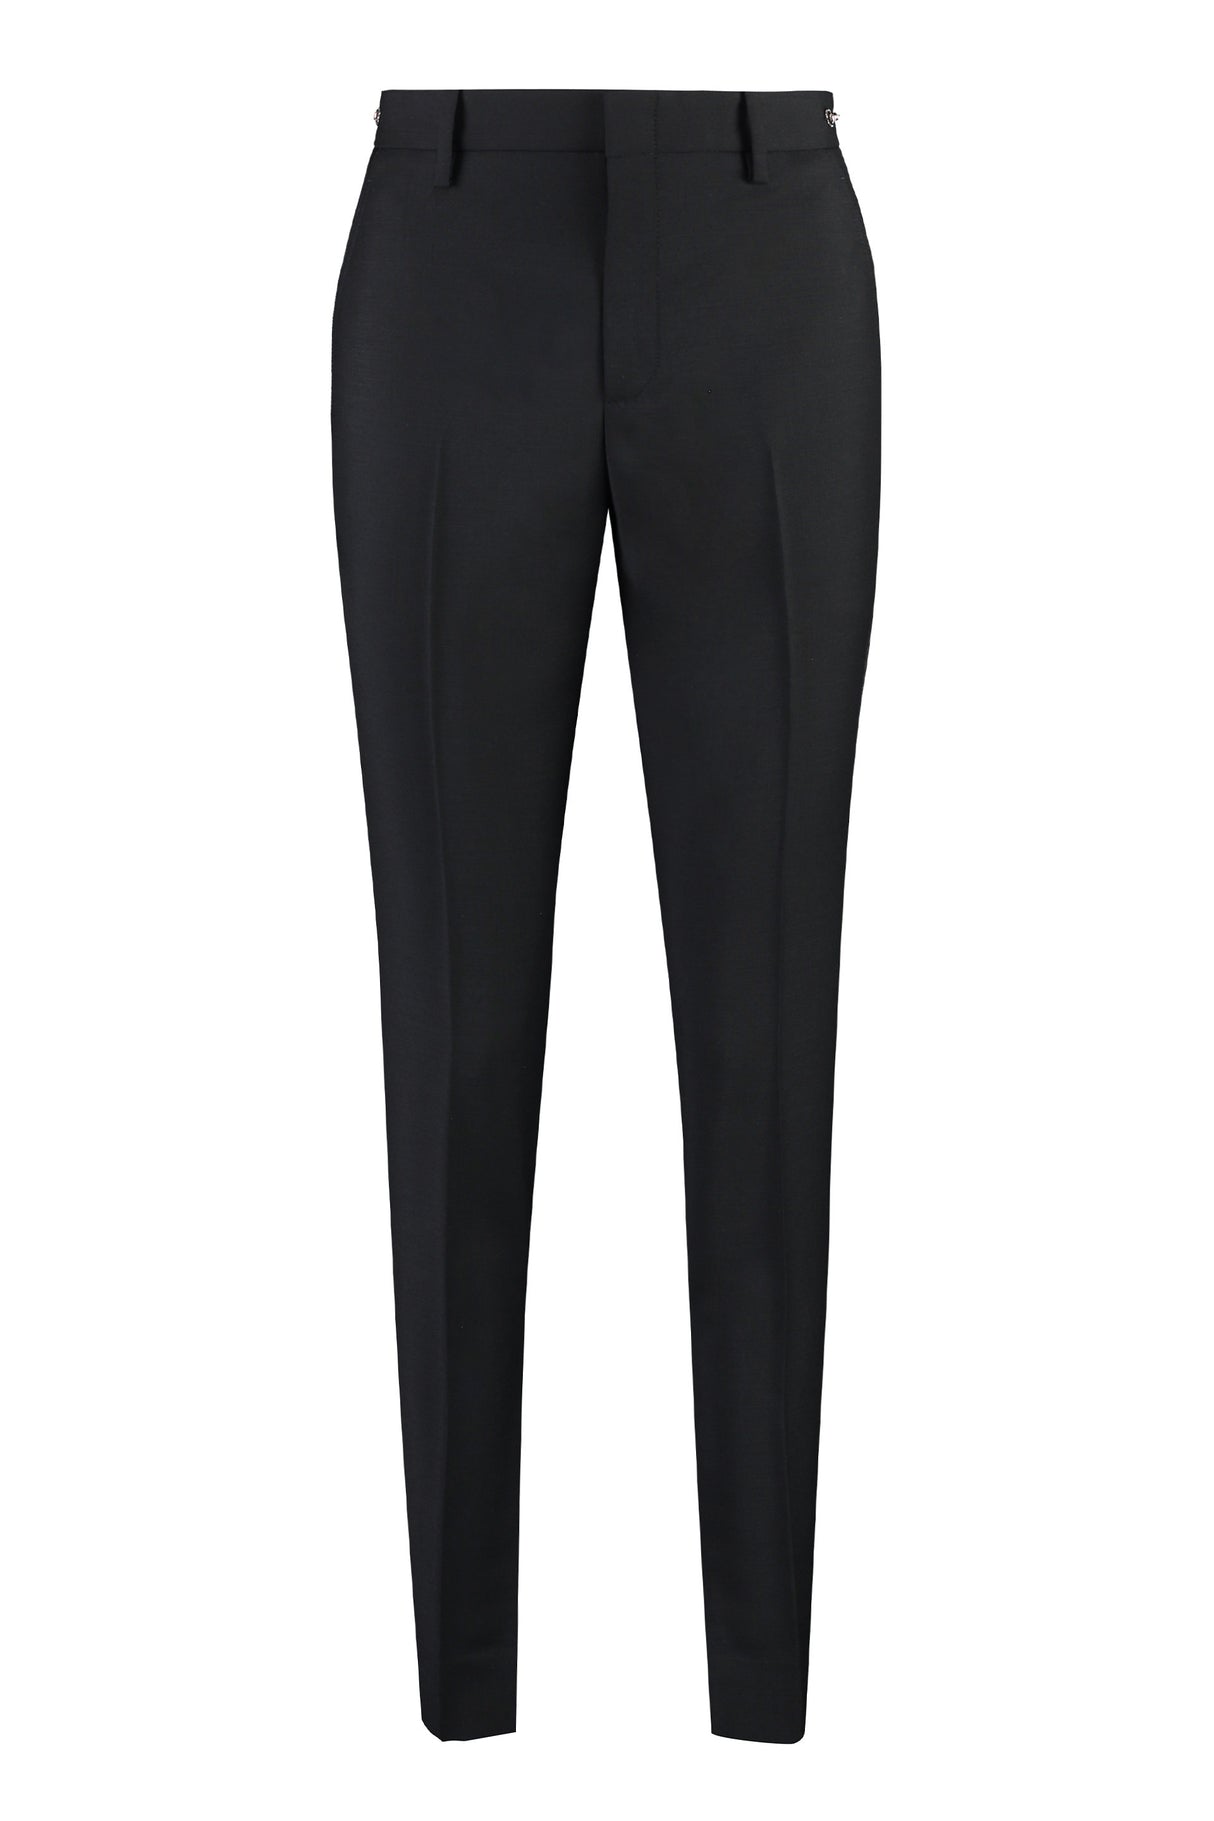 GUCCI Luxurious Black Wool Blend Trousers for Women from FW23 Collection